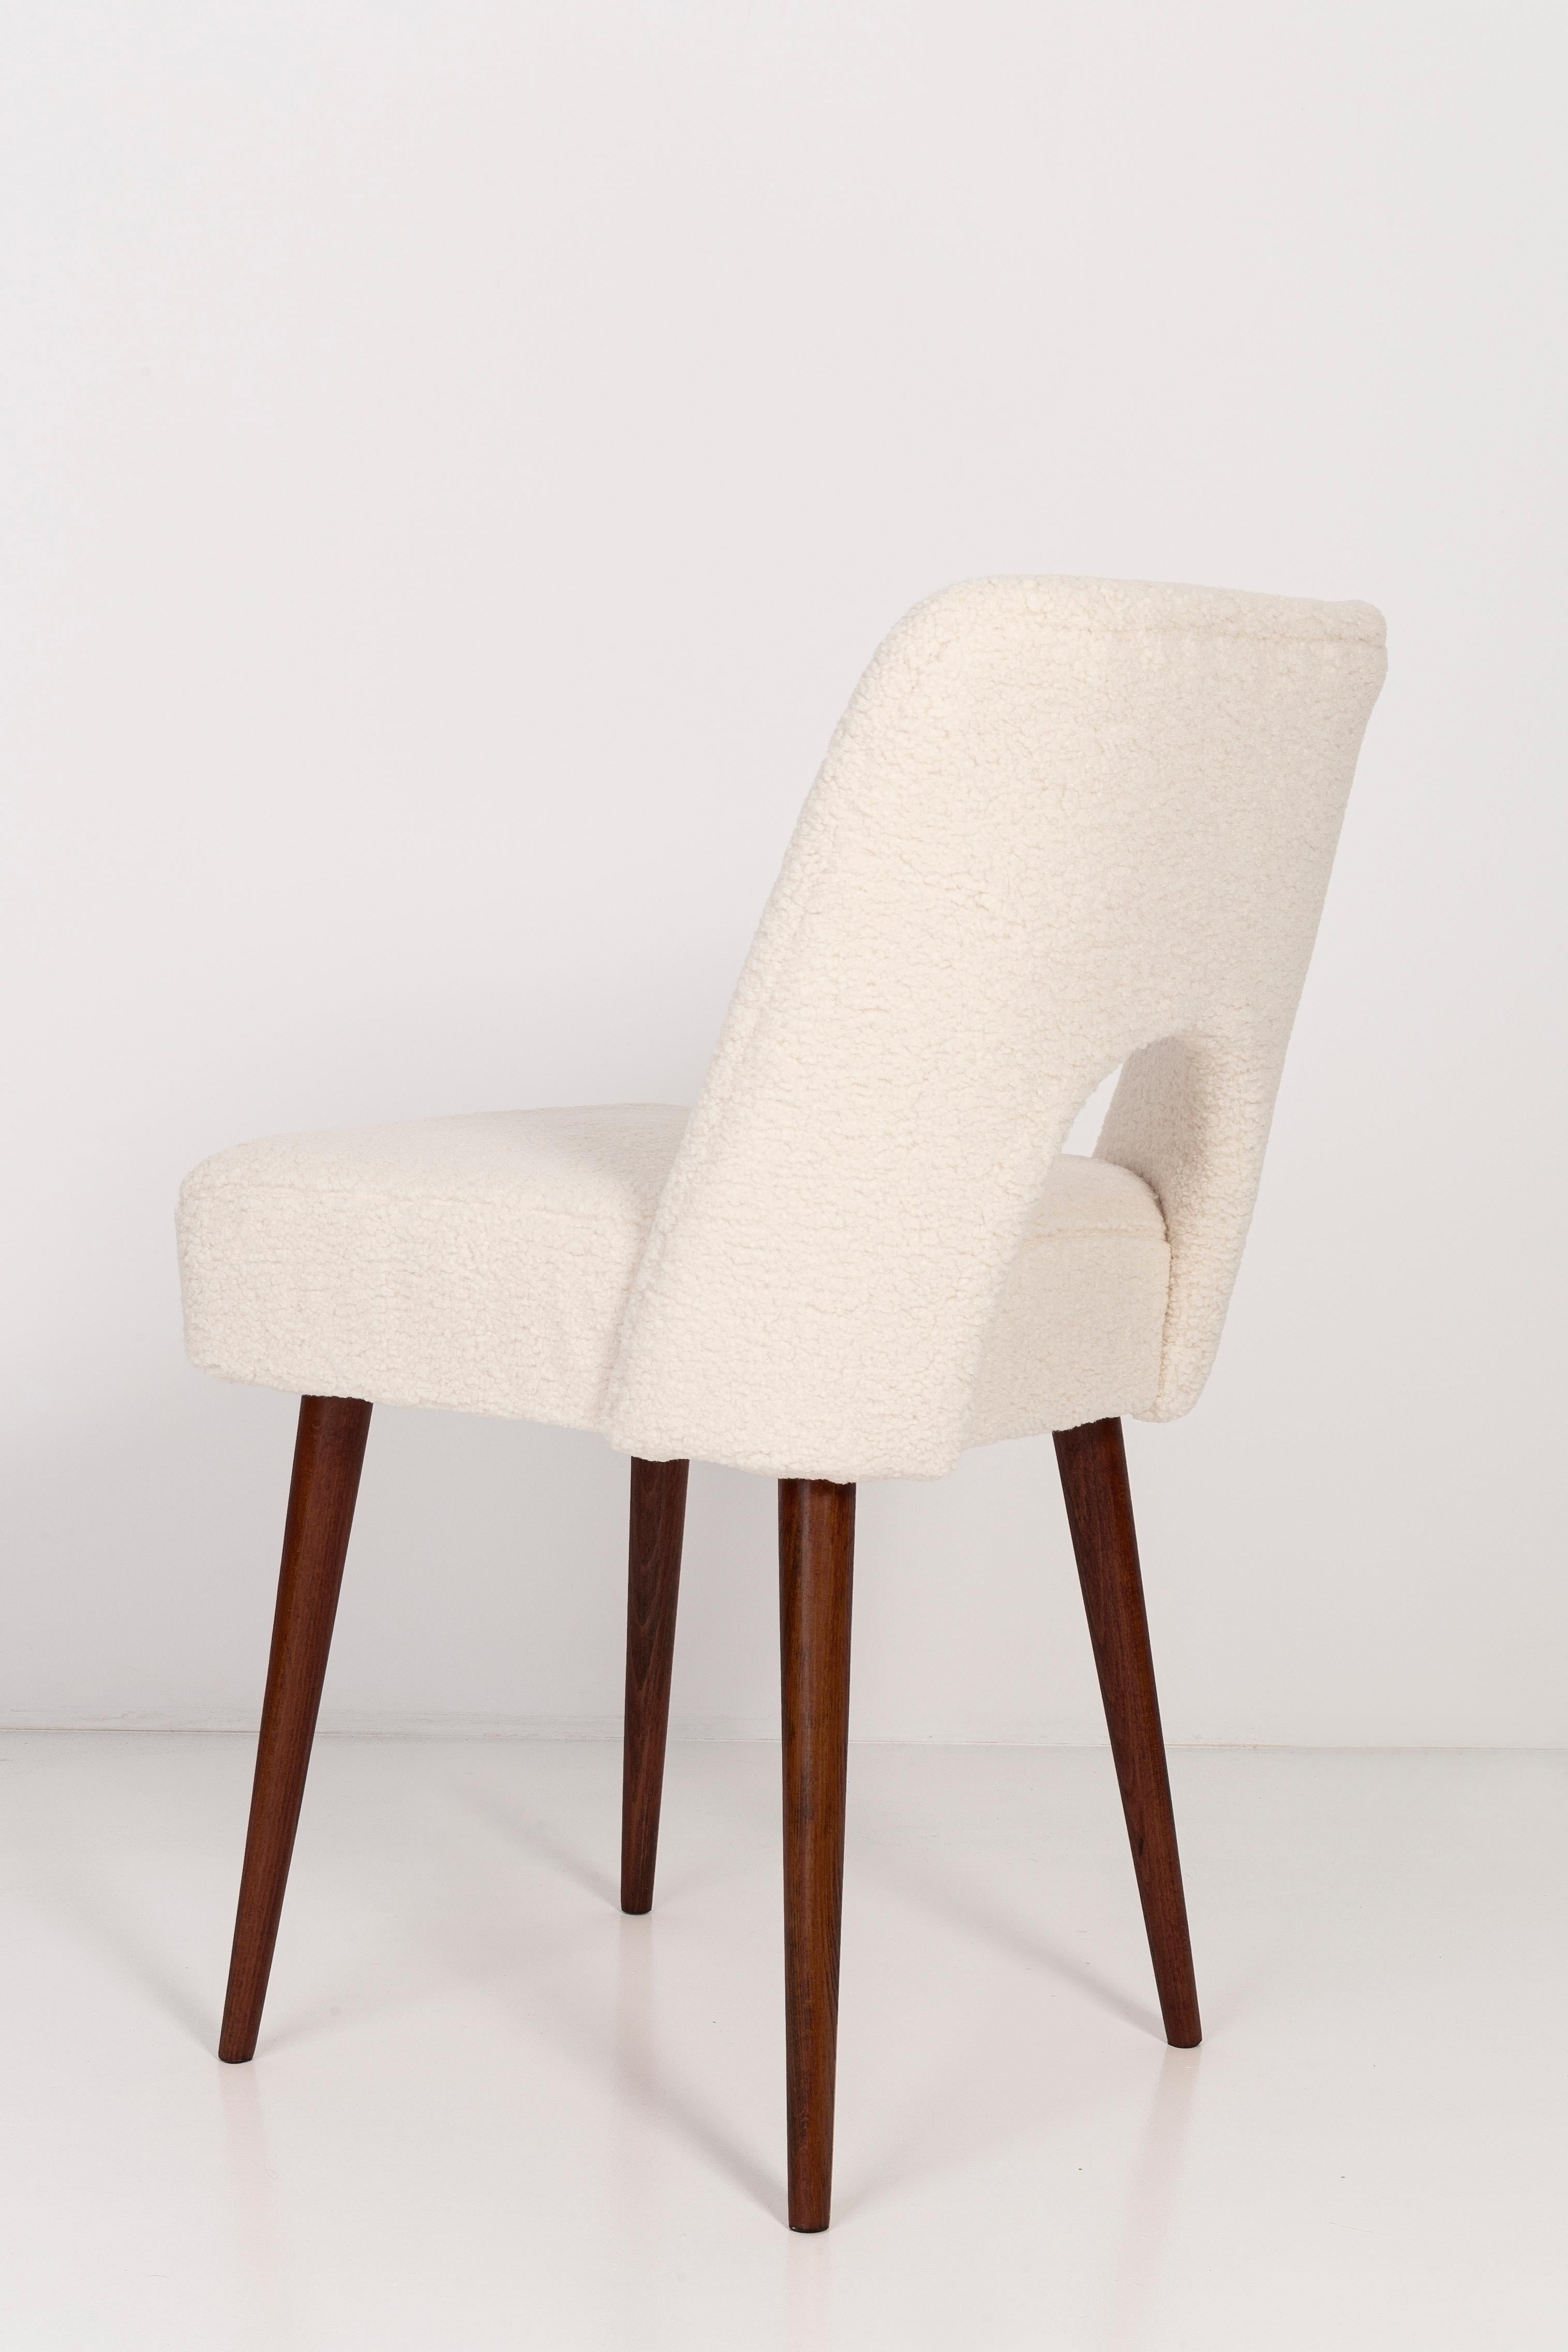 Two Light Crème Boucle 'Shell' Chairs, 1960s For Sale 1